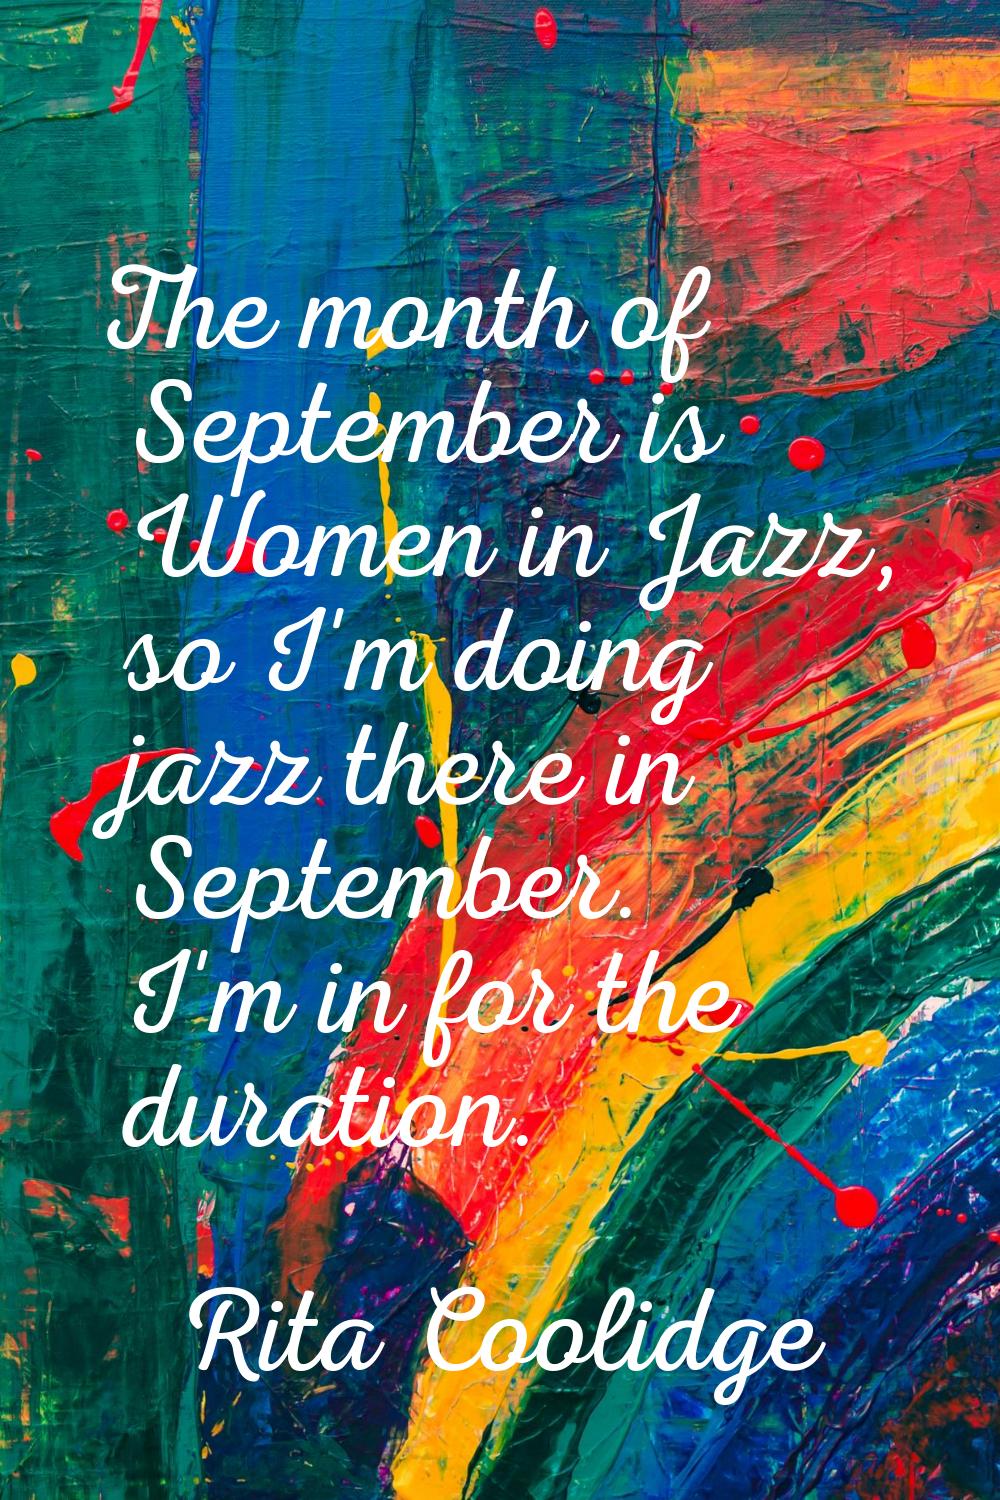 The month of September is Women in Jazz, so I'm doing jazz there in September. I'm in for the durat